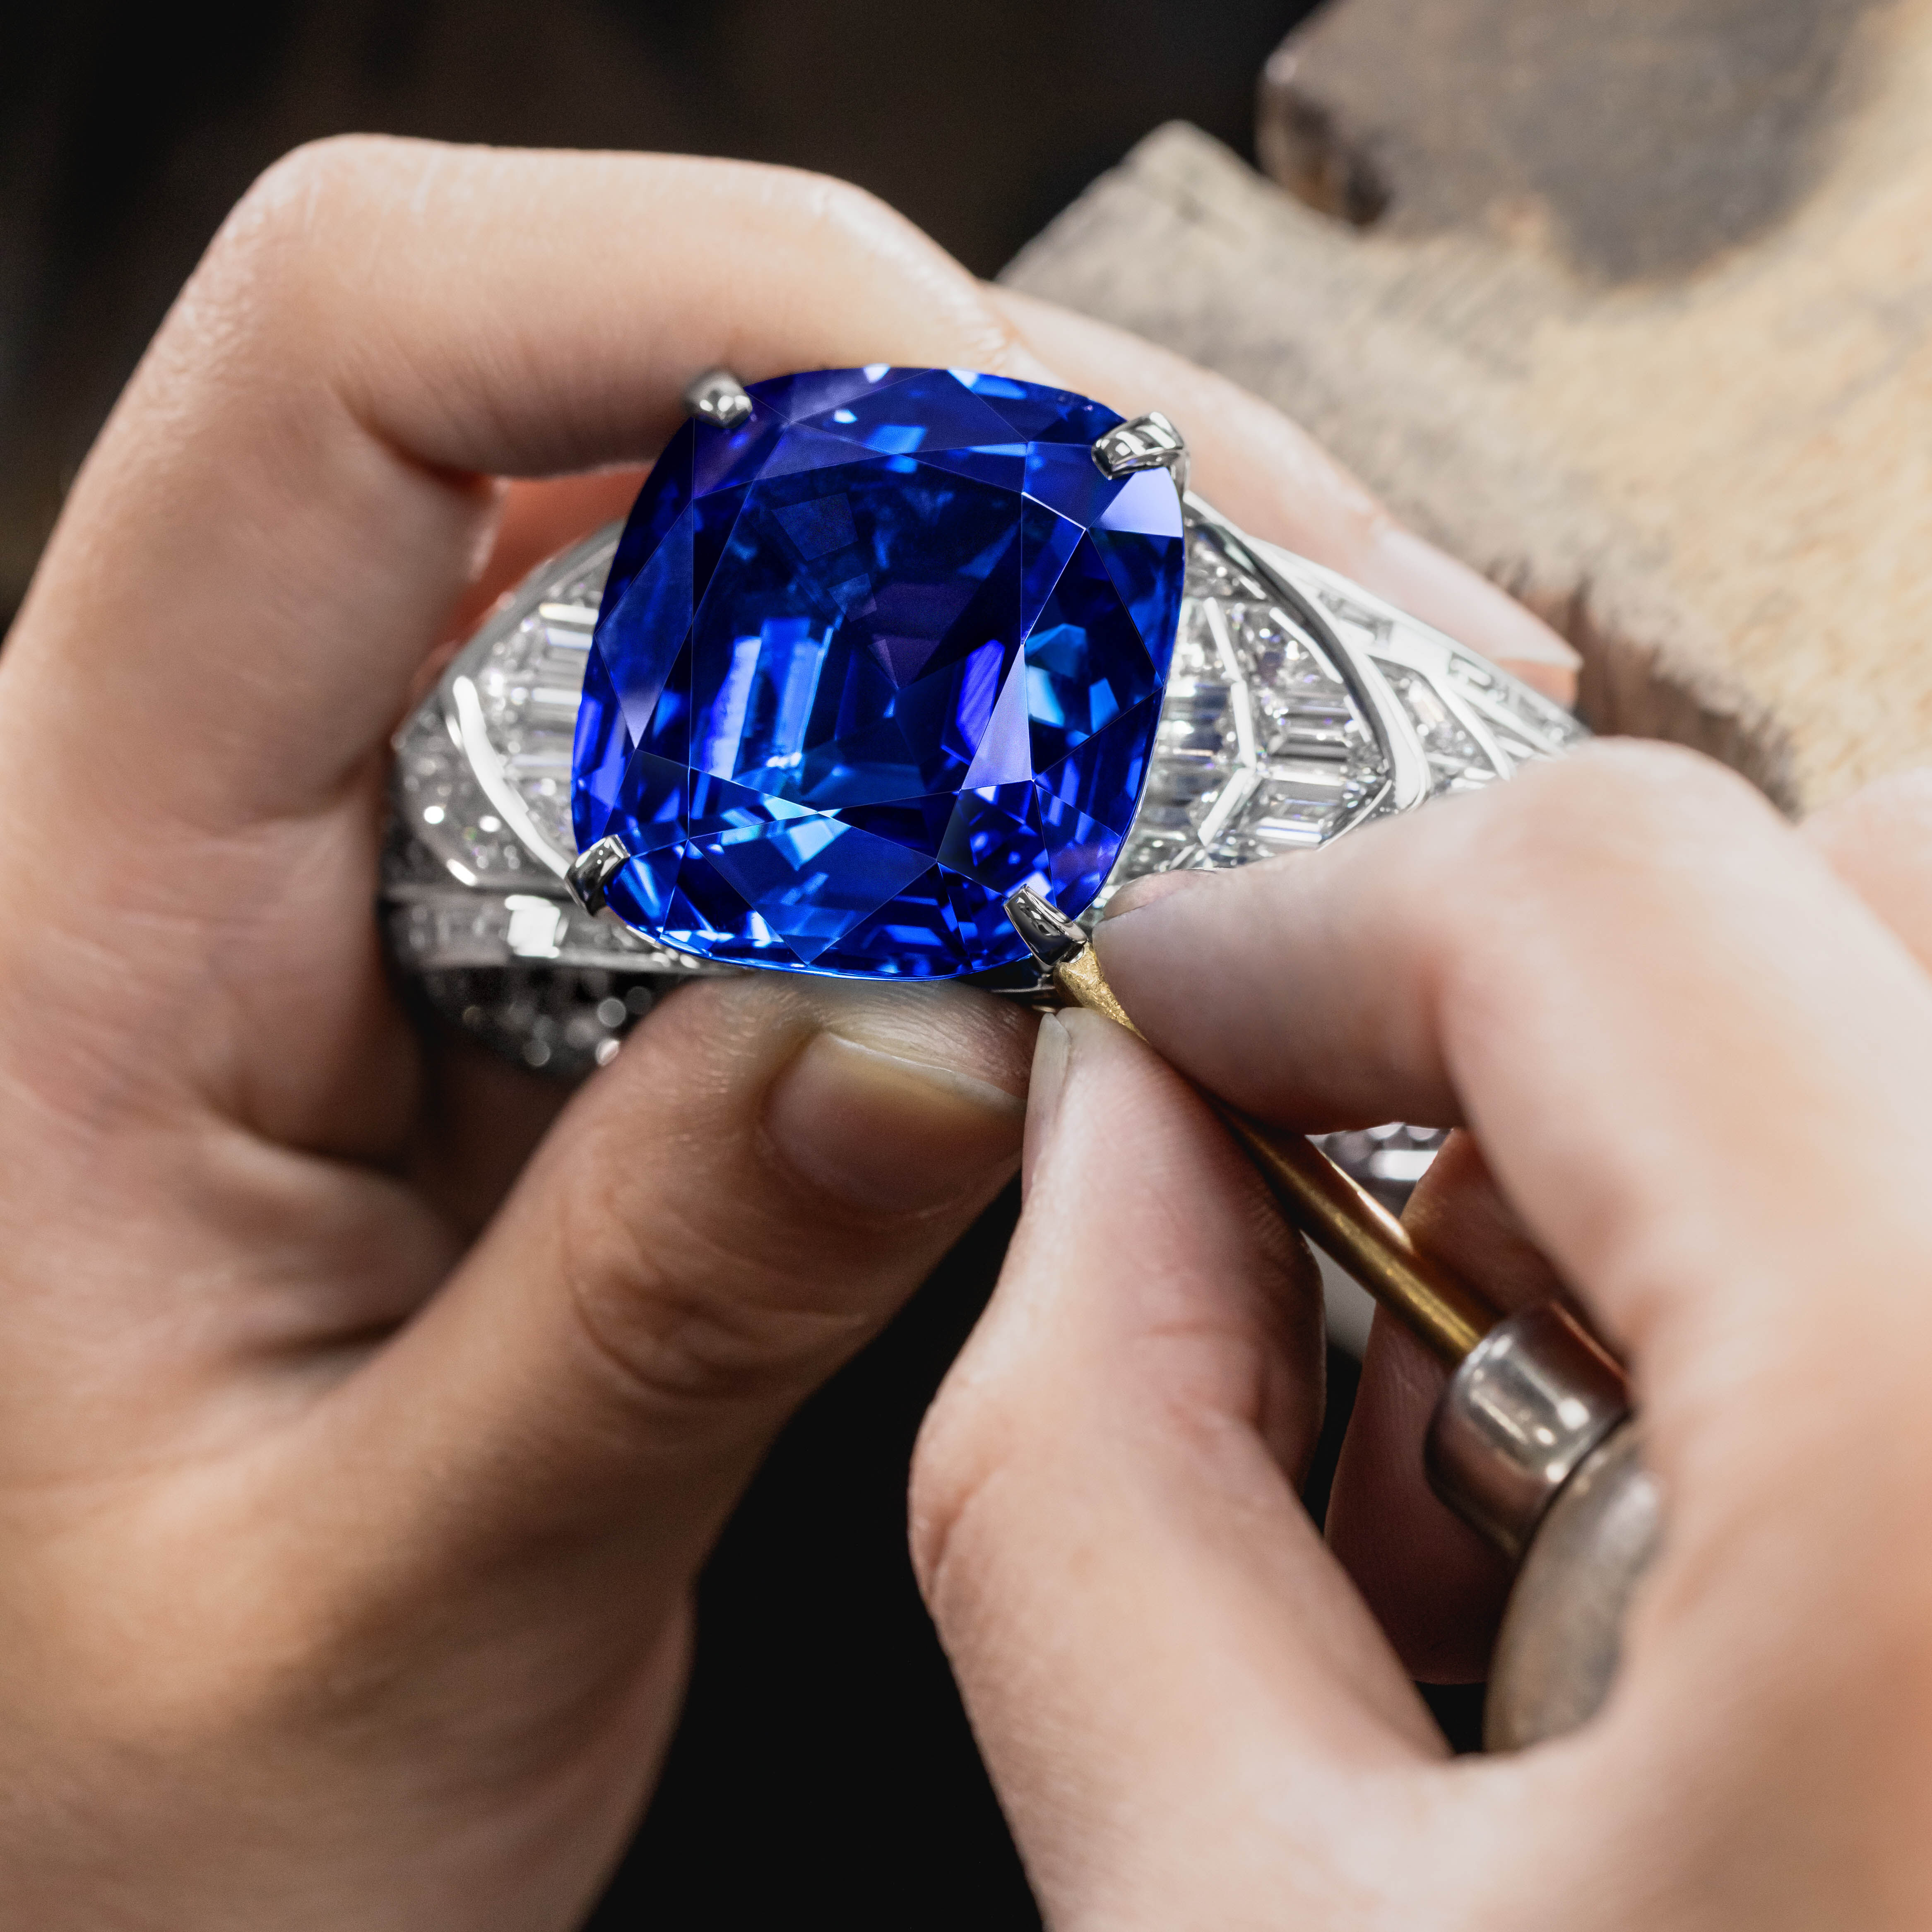 Image of Graff Sapphire High Jewellery  Bangle being finished by Graff craftsman in workshop